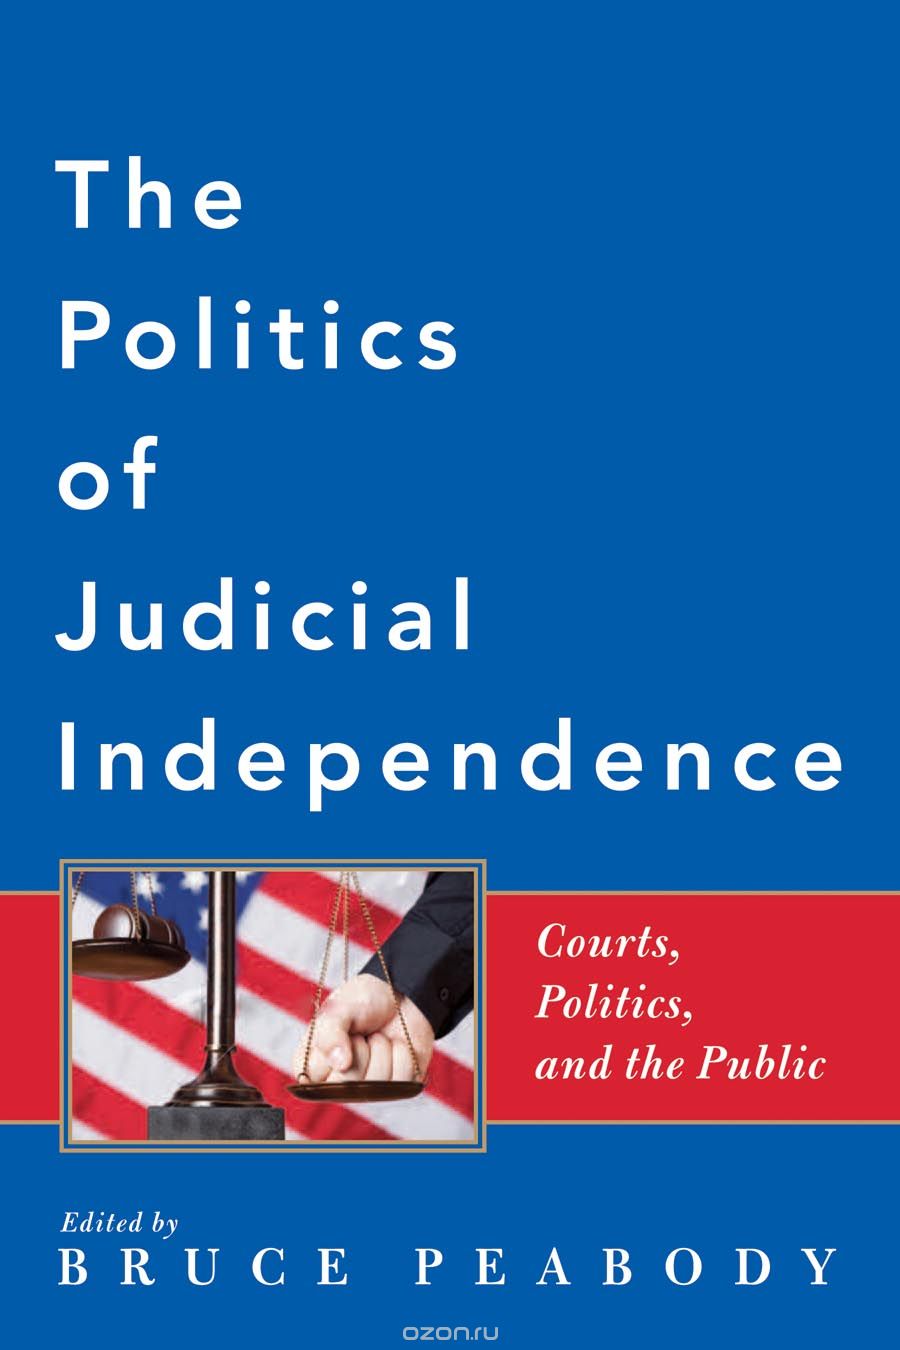 The Politics of Judicial Independence – Courts, Politics and the Public